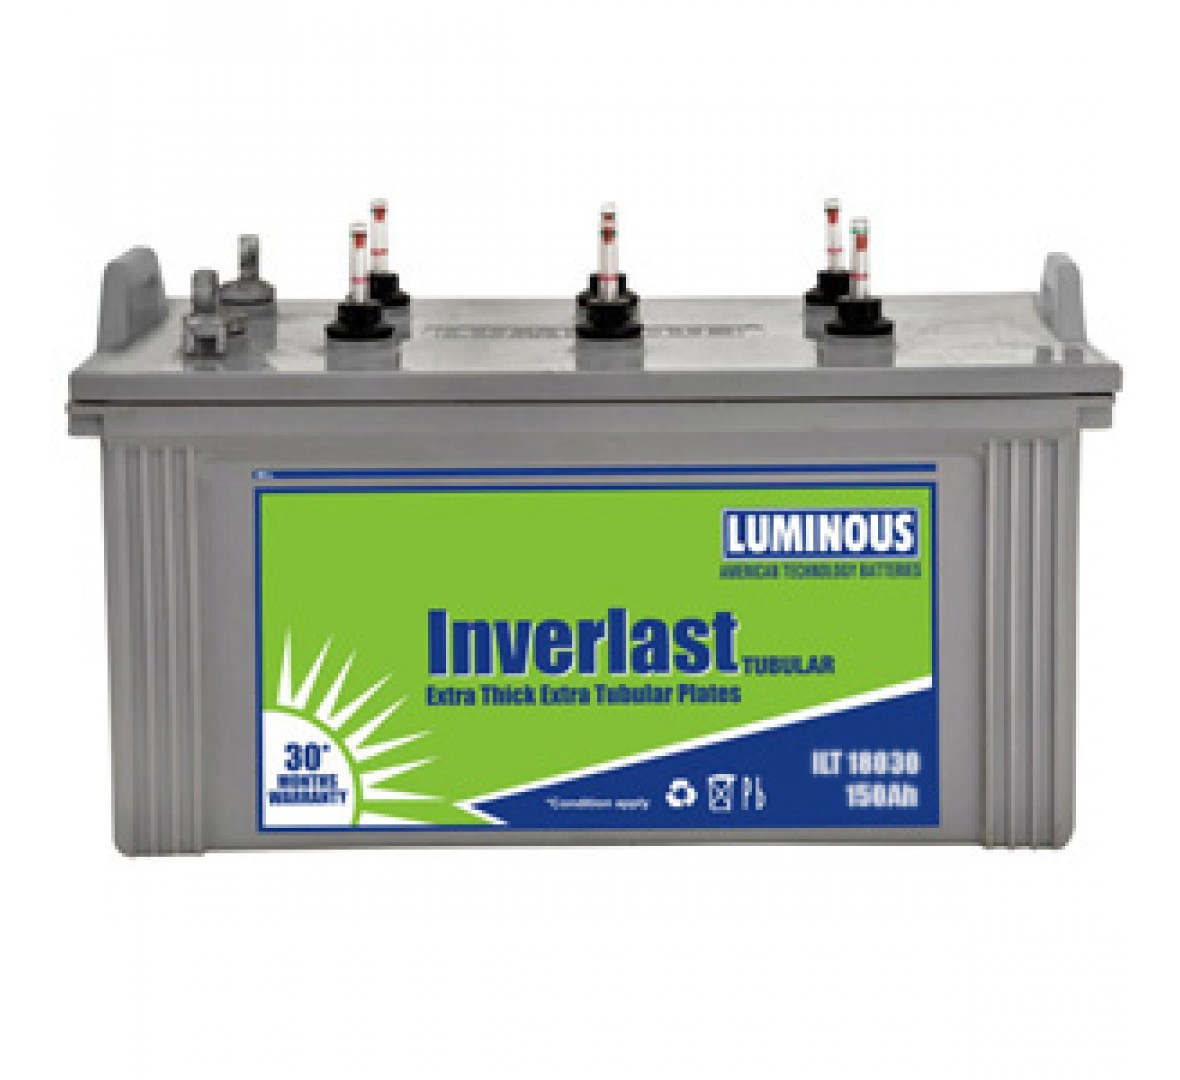 Chaudhary Batteries & Electricals in Delhi